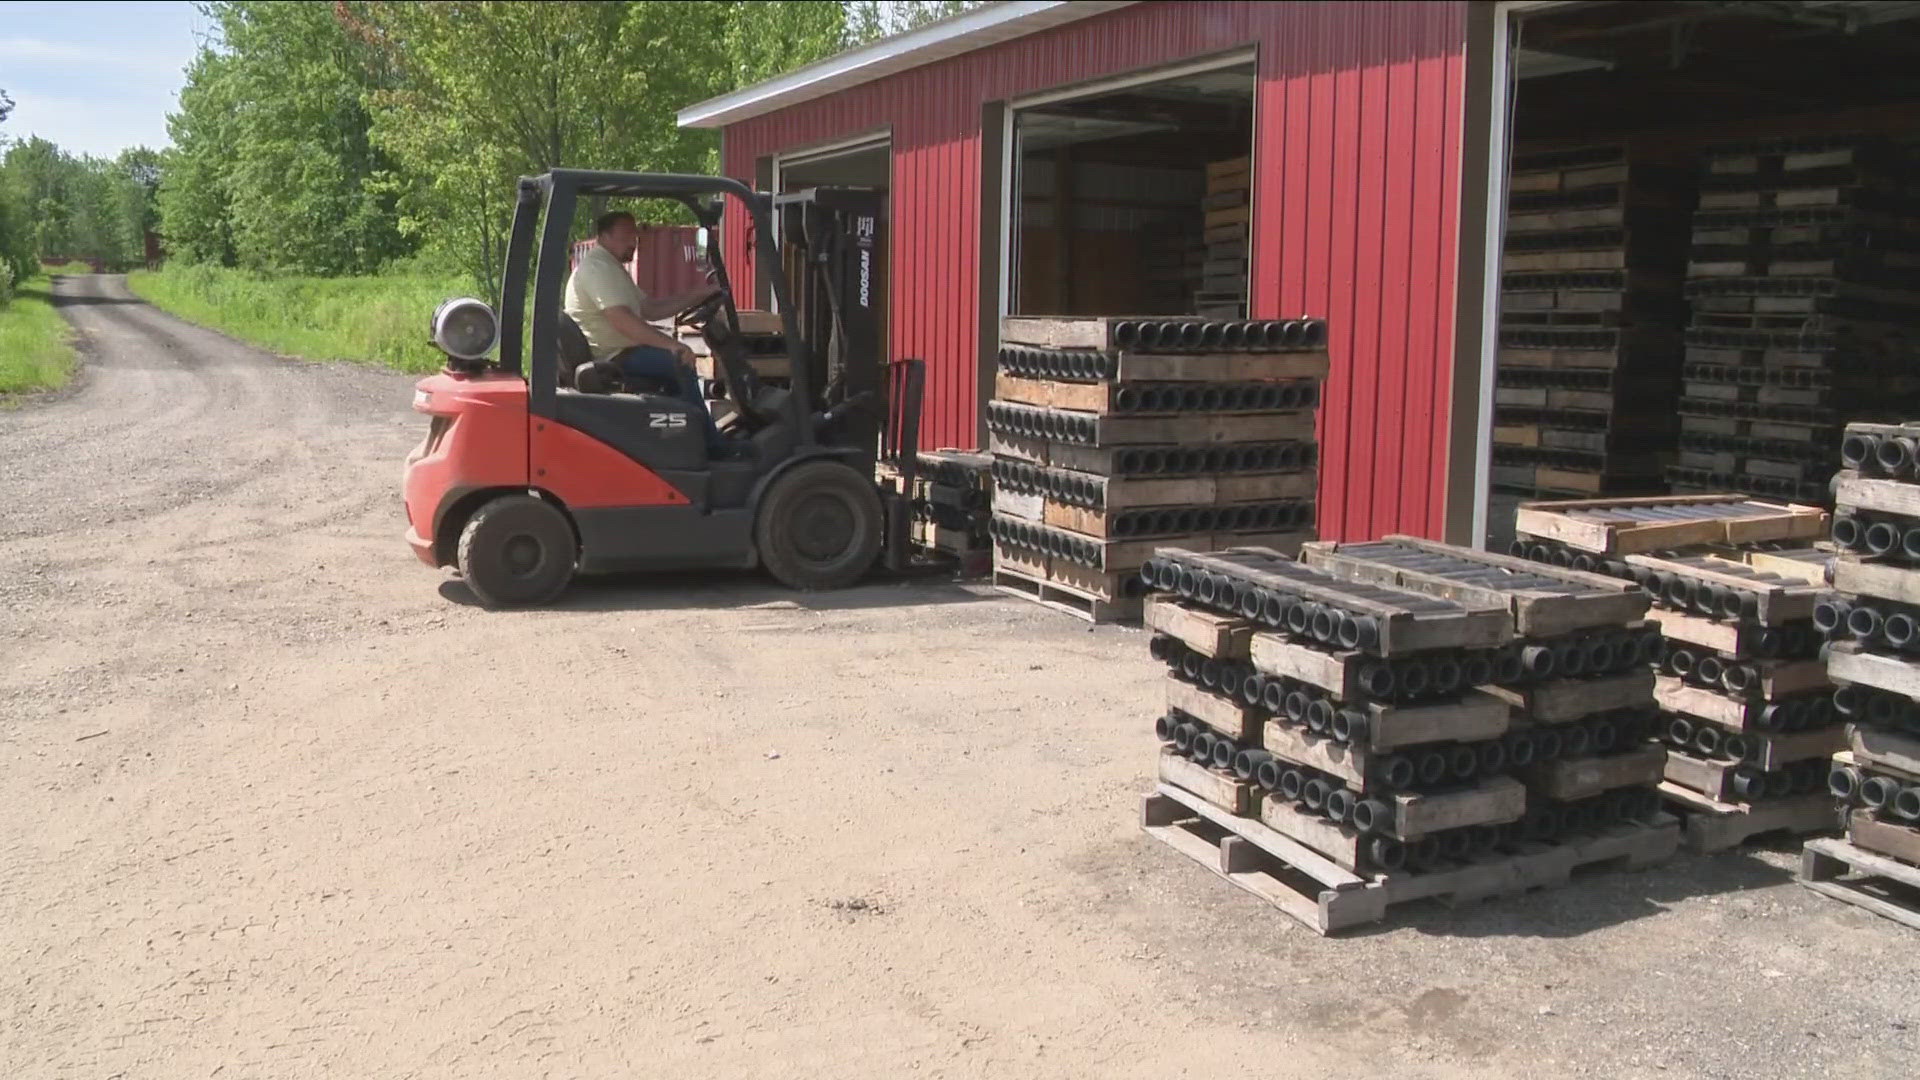 How one professional fireworks company prepares to put on a show